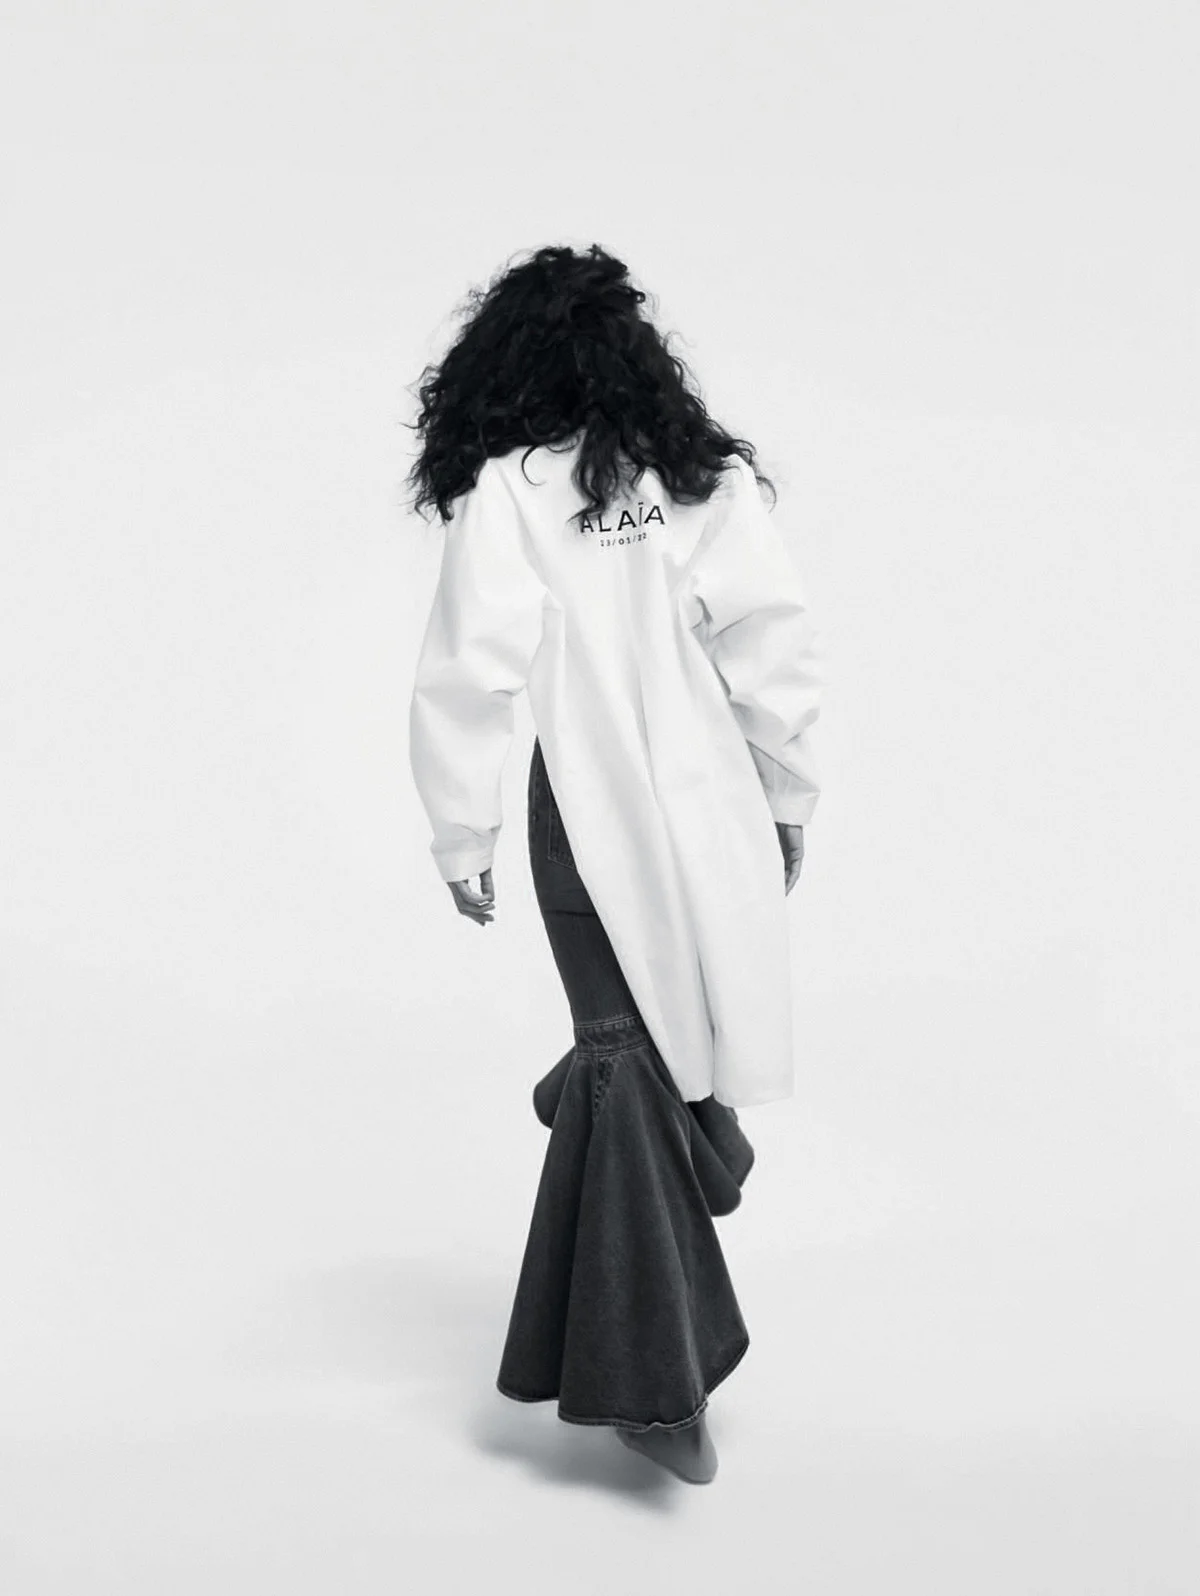 Mariacarla Boscono in Alaïa on AnOther Magazine Spring Summer 2022 by Willy Vanderperre